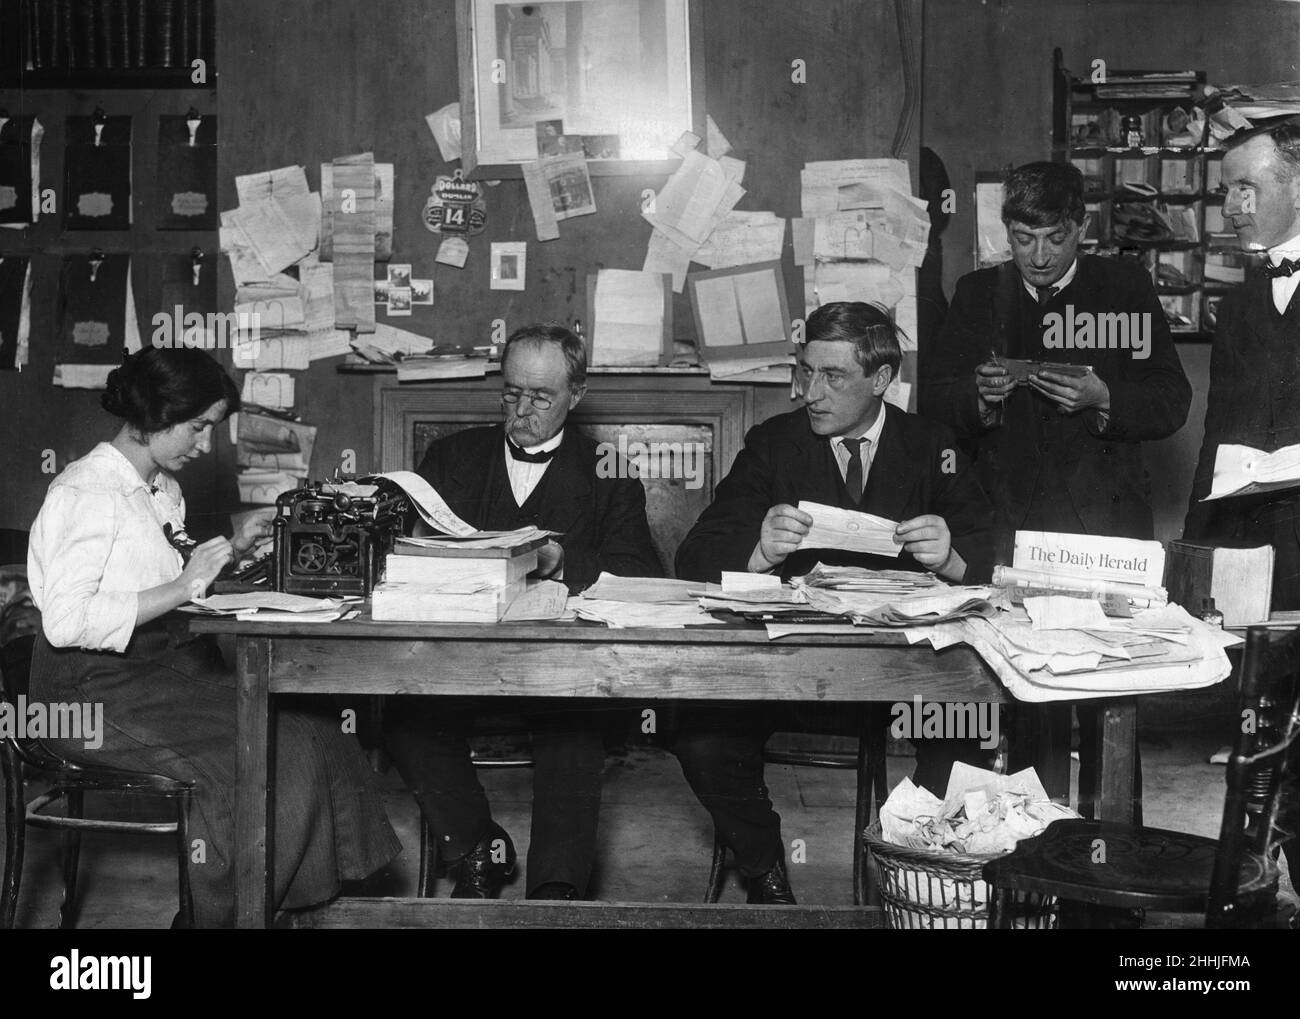 Irish trade Union leader and social activist James Larkin pictured in his office at liberty hall in Dublin with his typist and secretary Mrs McKeon perusing a mass of correspondance, dealing with transport and other matters left in absence during his imprisonment.Picture taken during the Dublin lockout, a major industrial dispute between 20000 workers and 300 employers between August 1913 and January 1914. Taken: 16th November 1913. Stock Photo